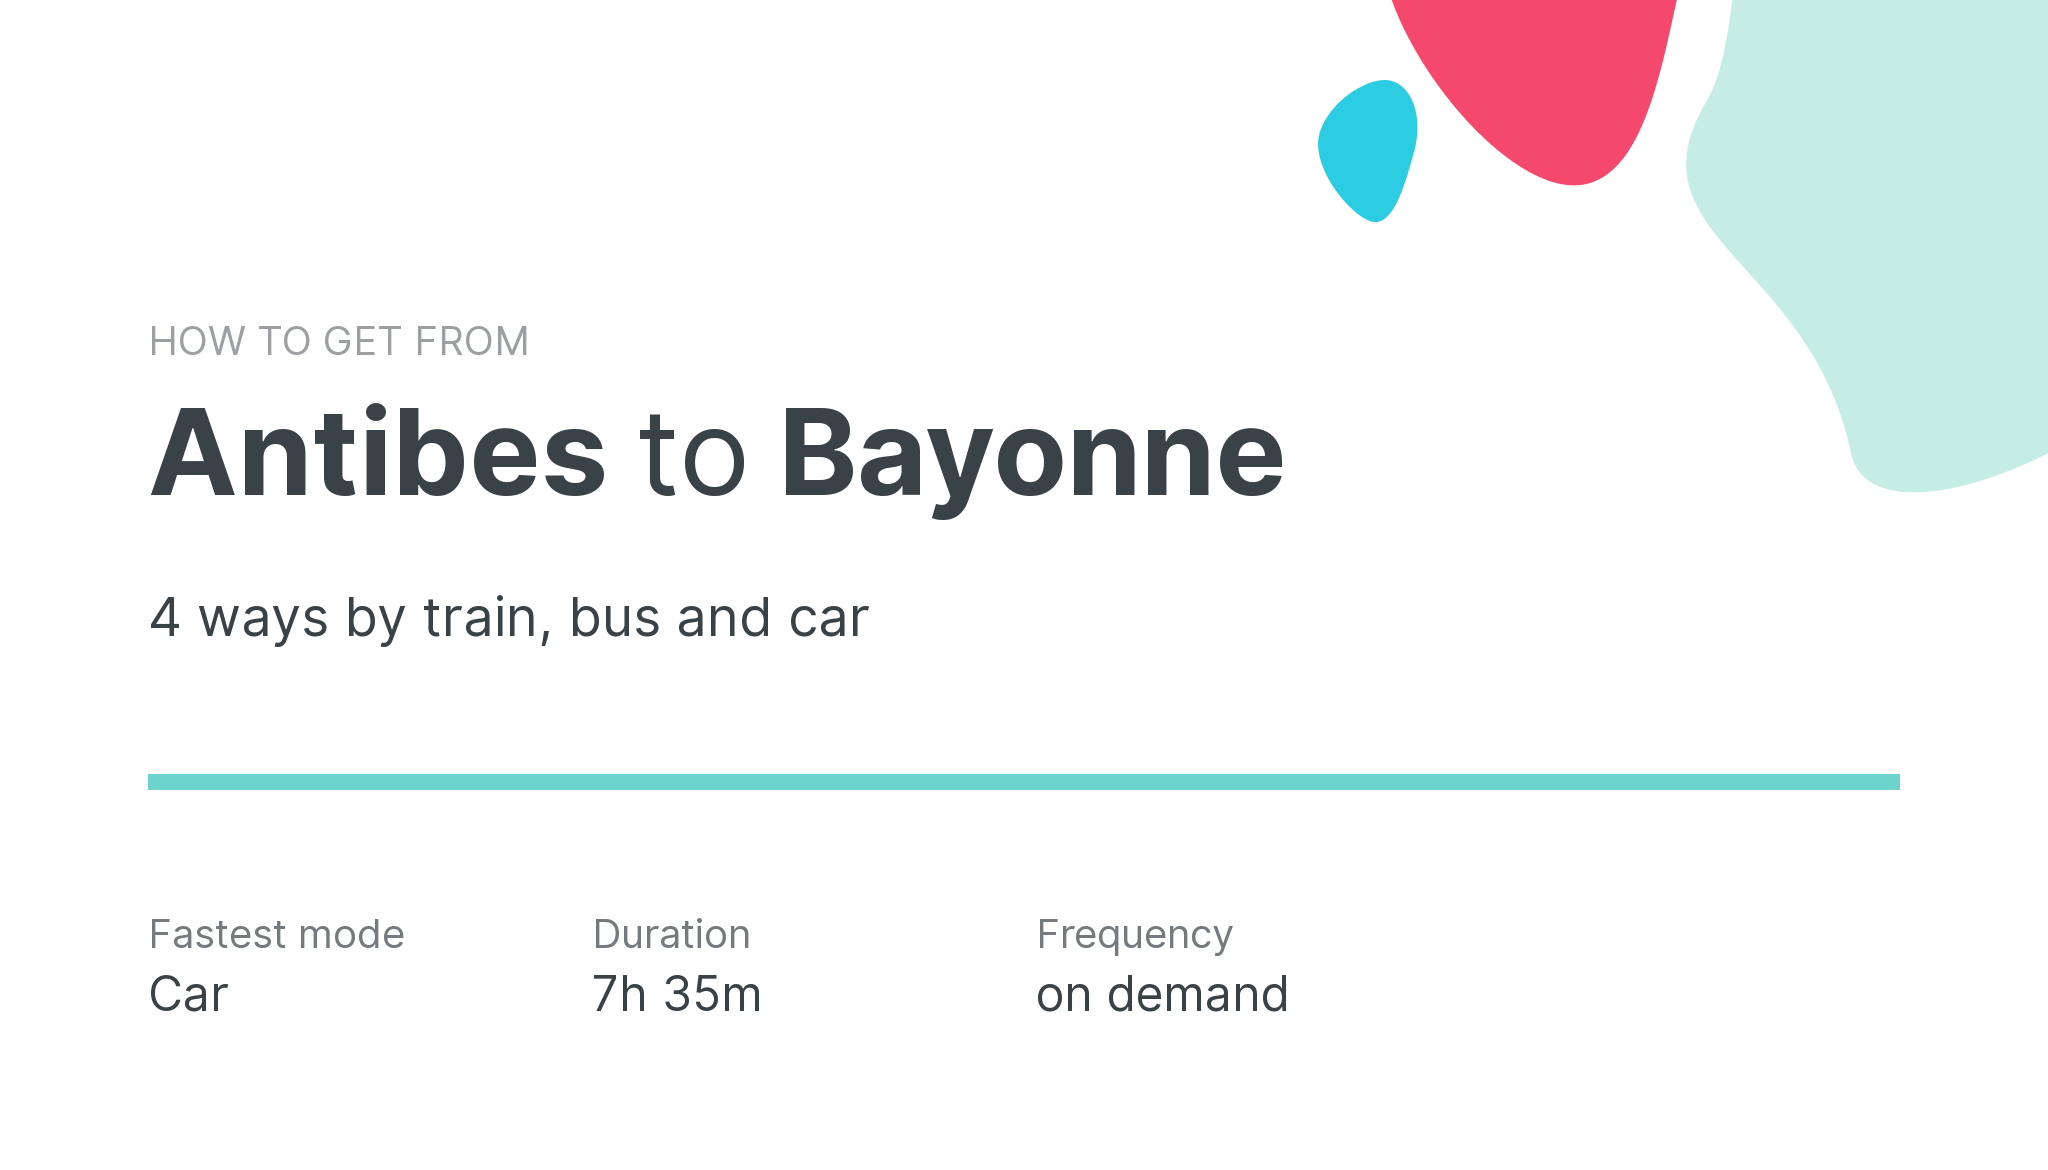 How do I get from Antibes to Bayonne